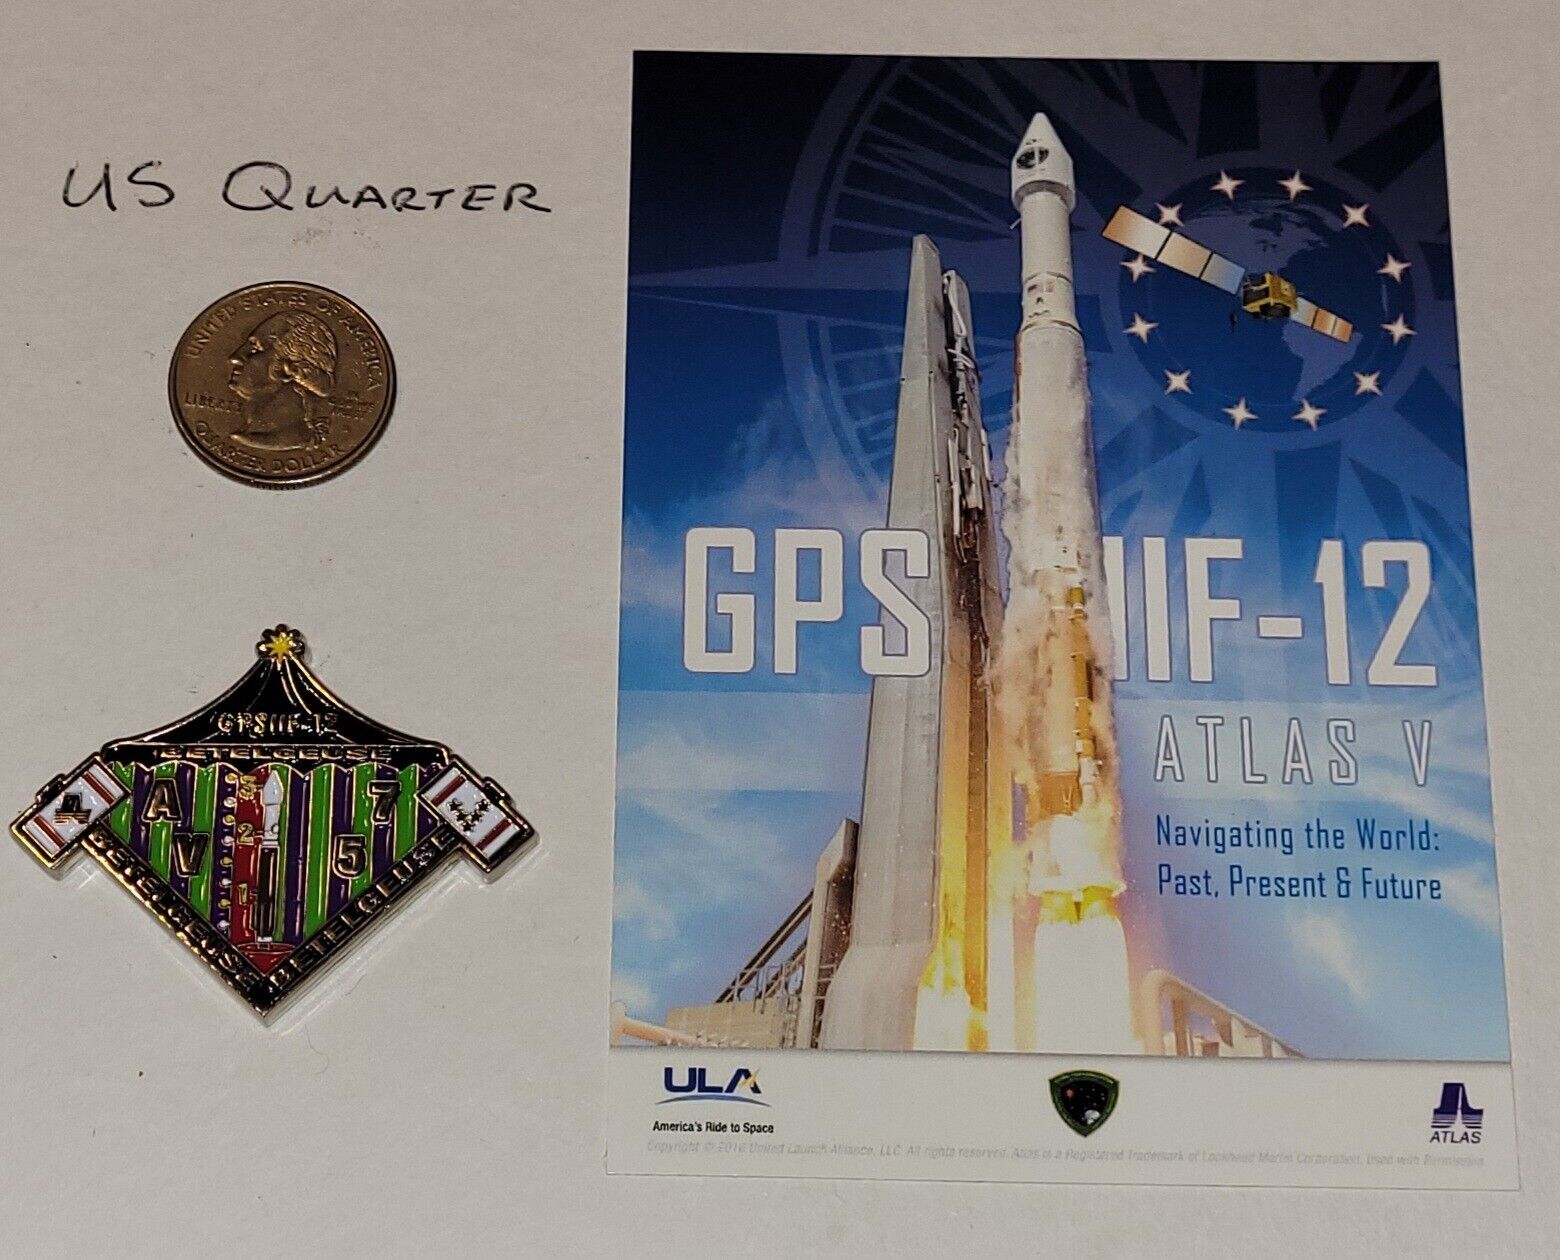 "beetlejuice" Ula Challenge Coin, Mission Patch, Mission Sticker - Betelgeuse